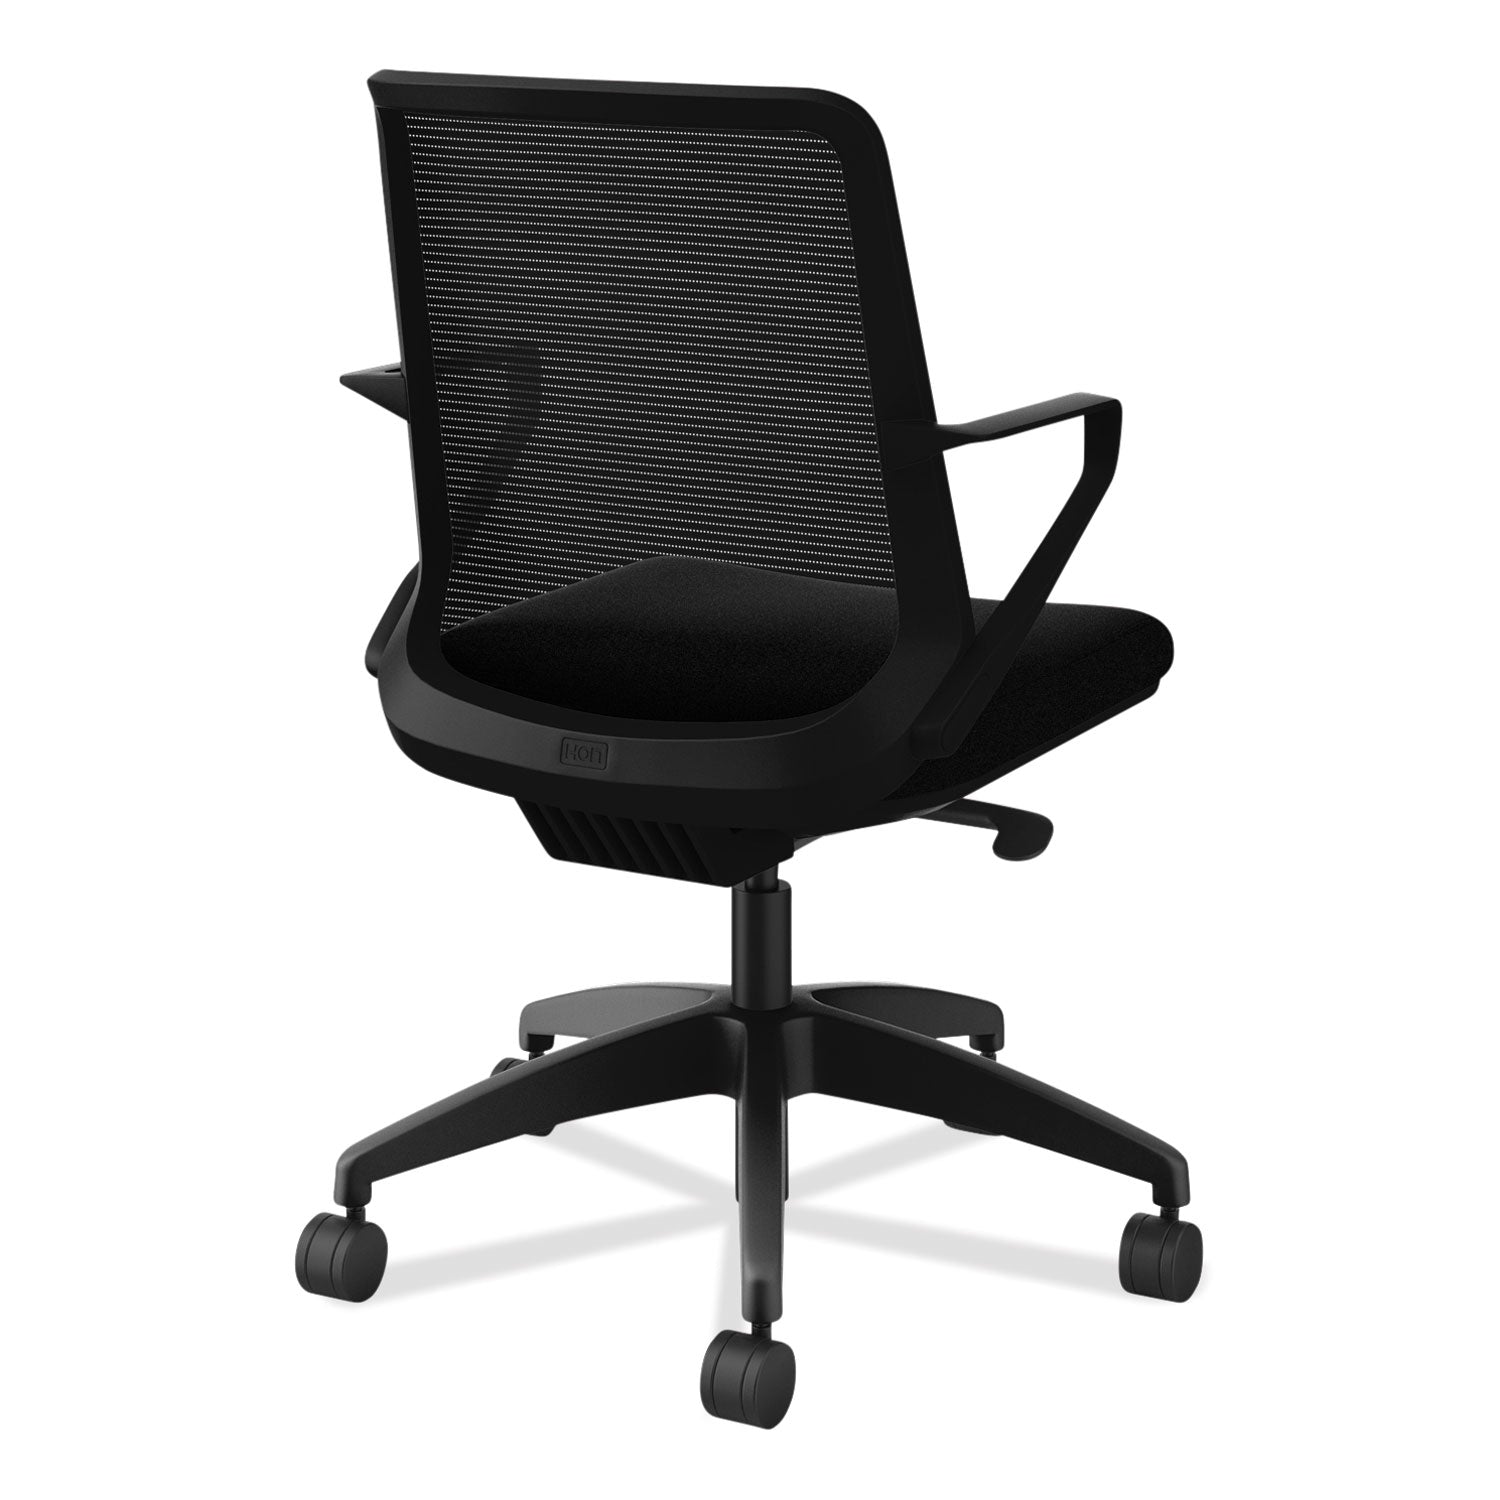 cliq-office-chair-supports-up-to-300-lb-17-to-22-seat-height-black-seat-back-black-base-ships-in-7-10-business-days_honclqimcu10t - 4